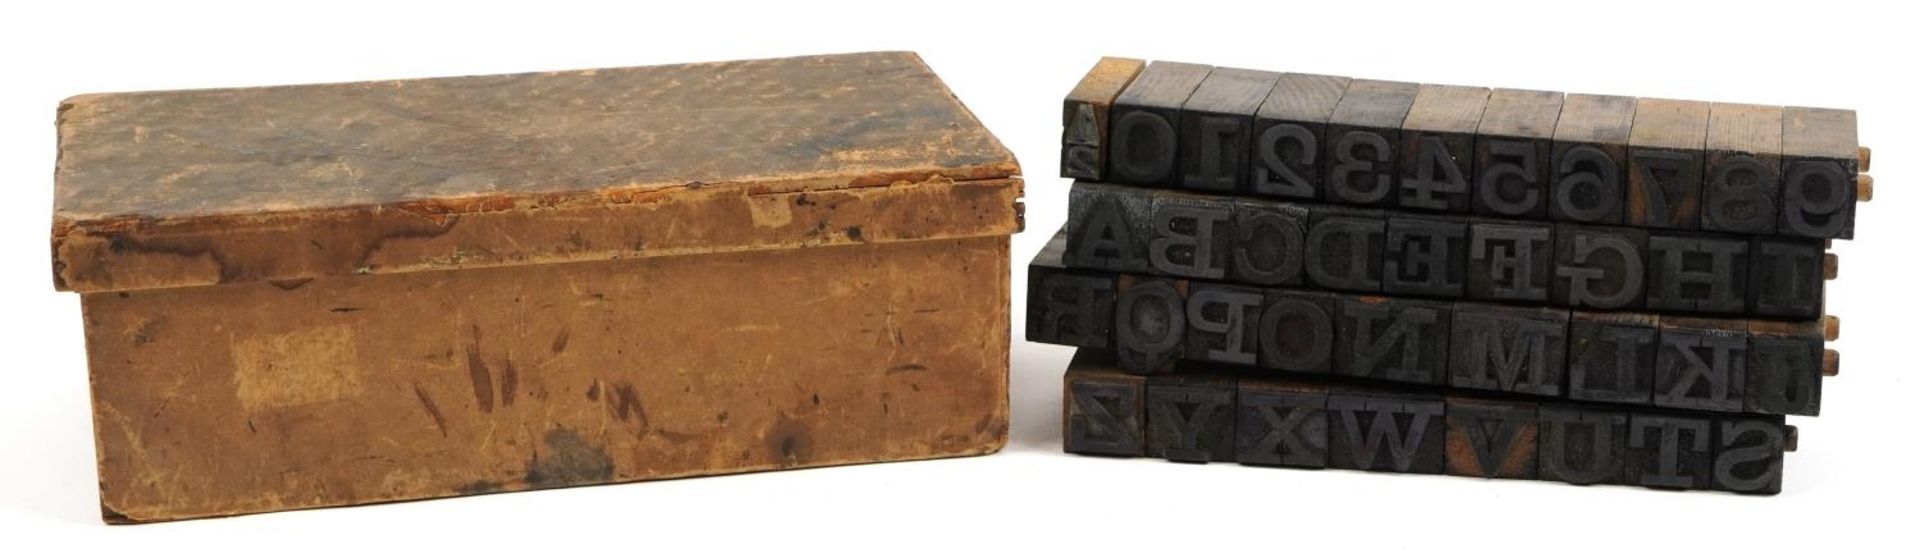 Set of vintage alphabet and numbers printer's blocks with fitted case : For further information on